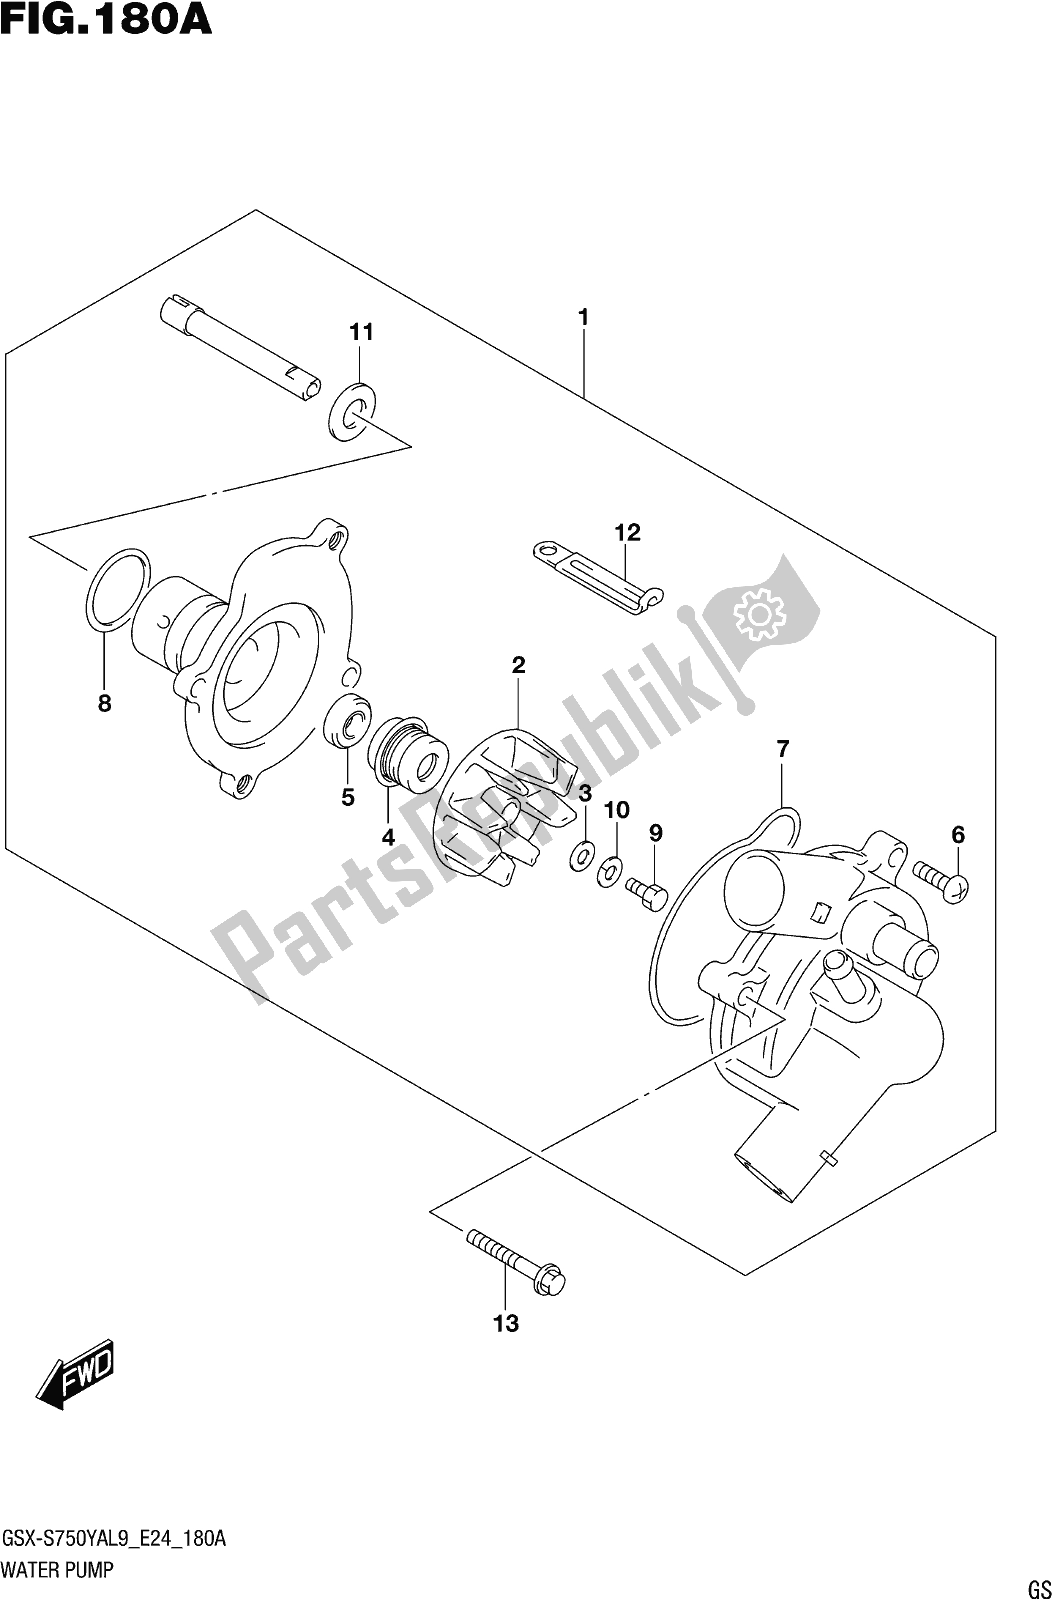 All parts for the Fig. 180a Water Pump of the Suzuki Gsx-s 750 ZA 2019